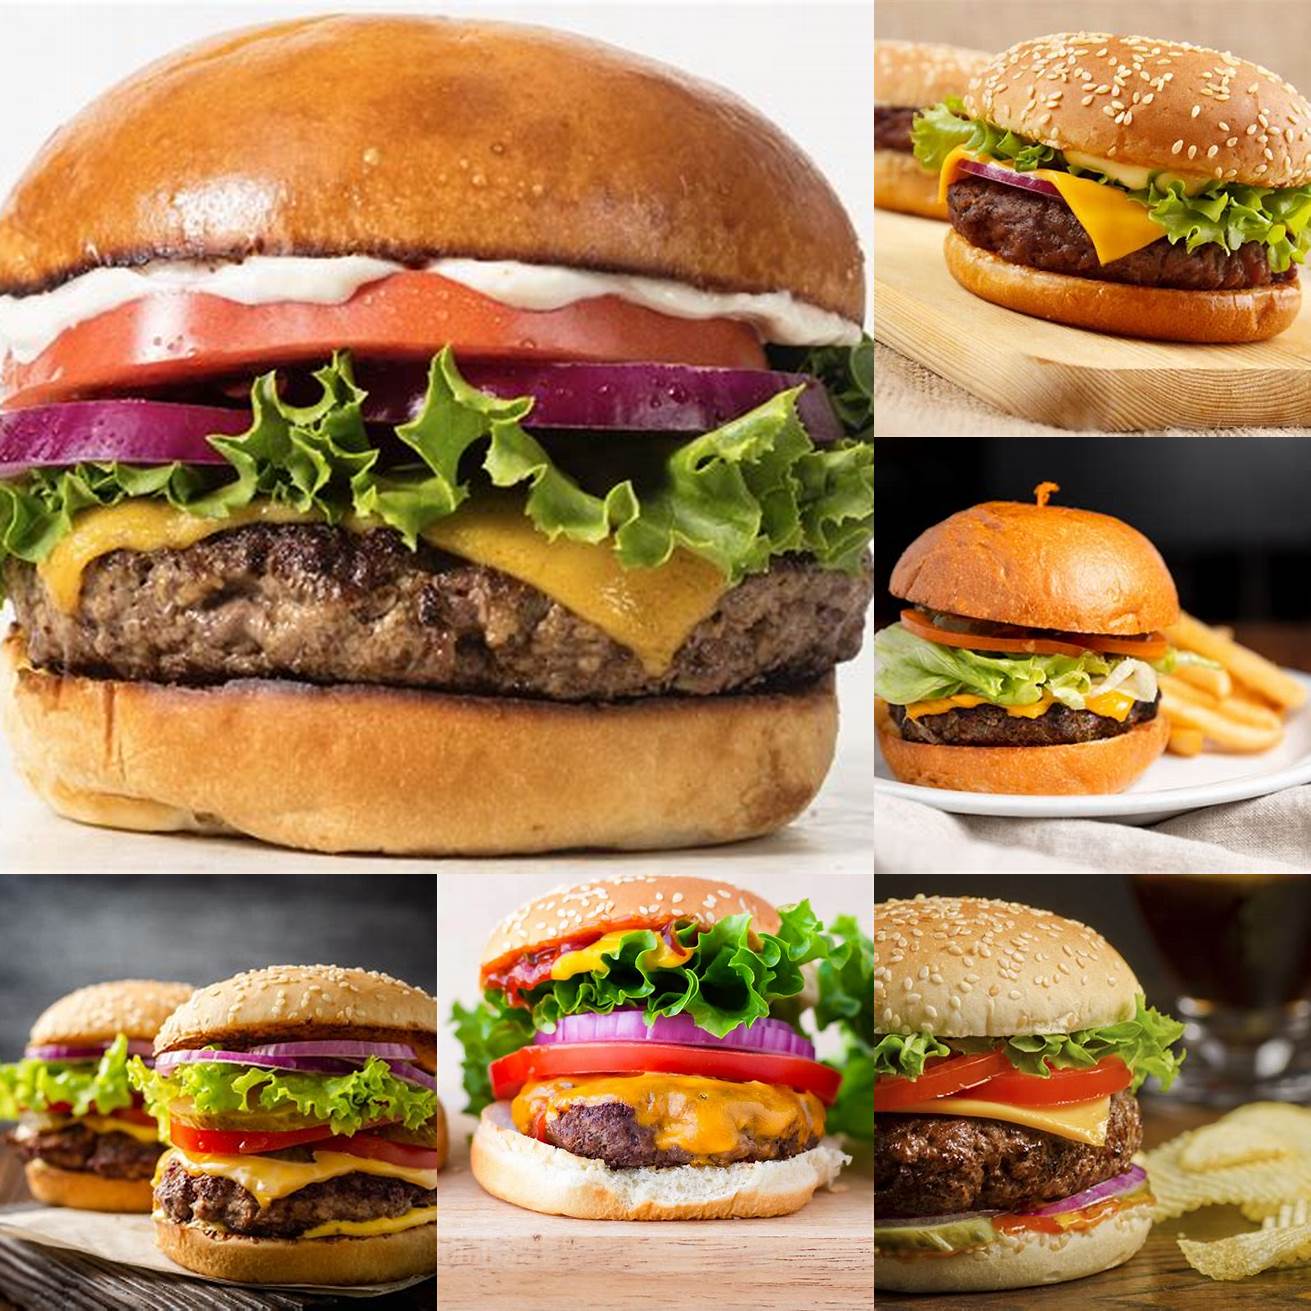 Burgers A classic American dish burgers are made with a beef patty cheese lettuce tomato and condiments such as ketchup and mustard